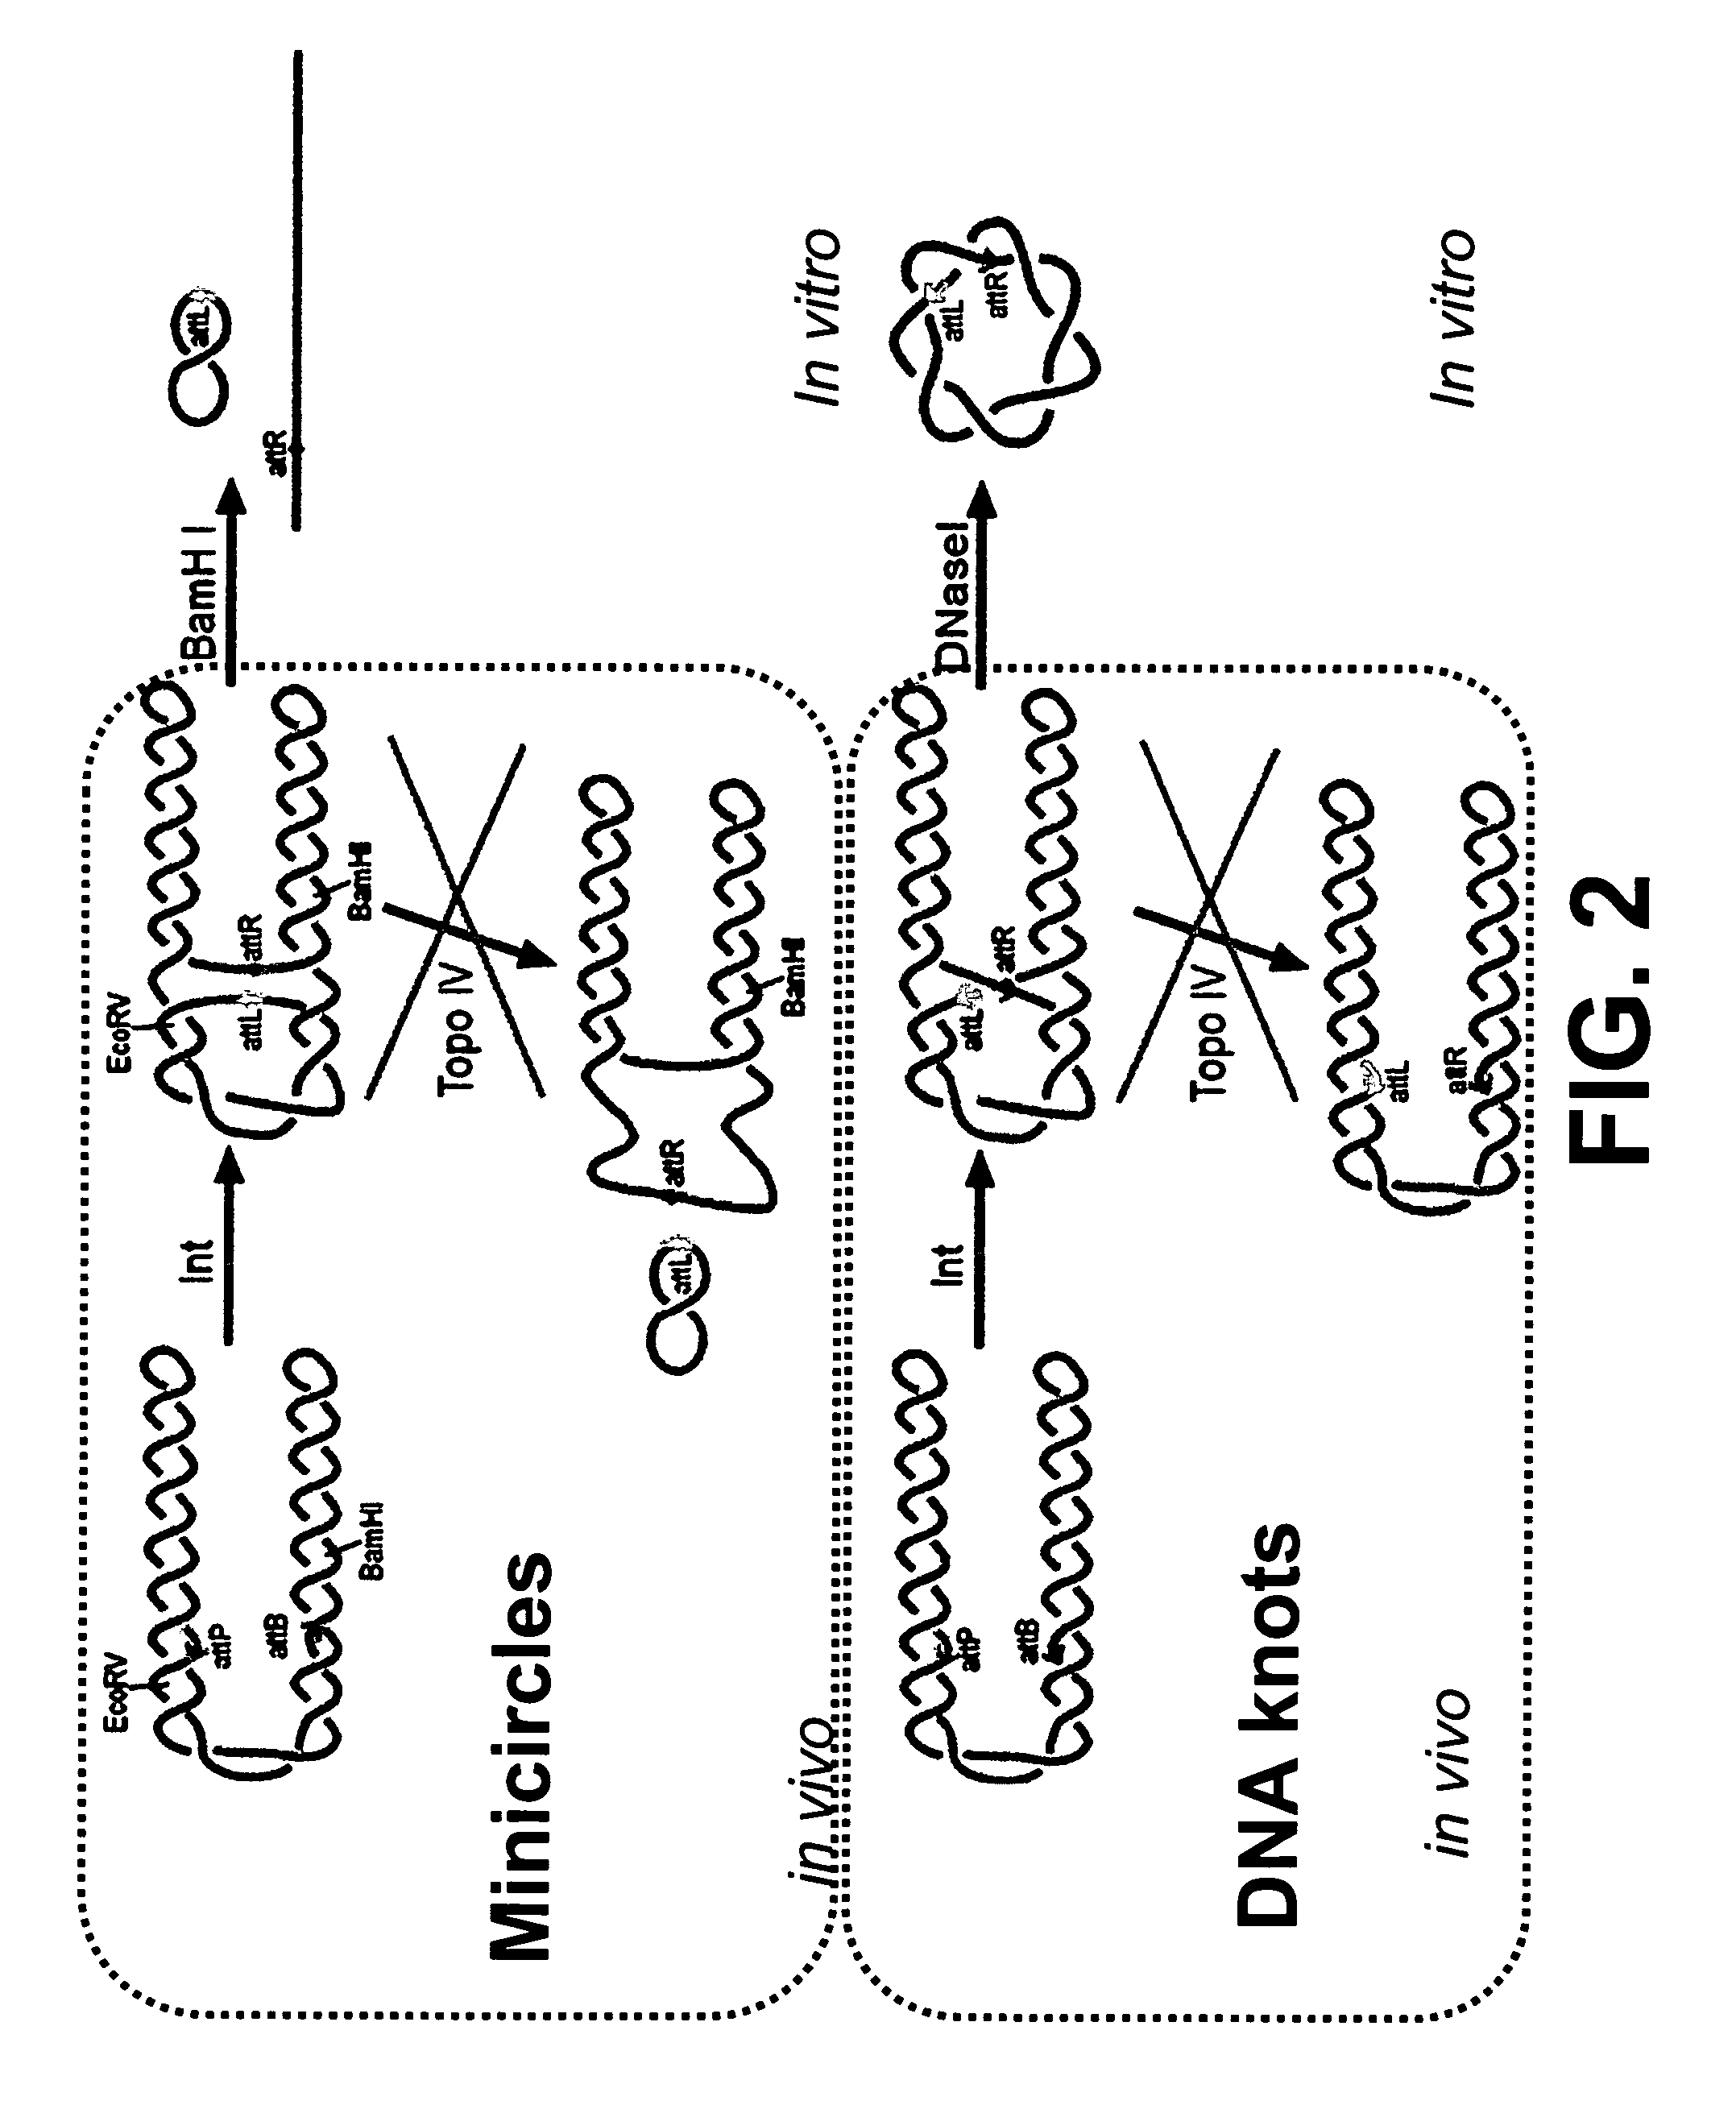 Generation of minicircle DNA with physiological supercoiling